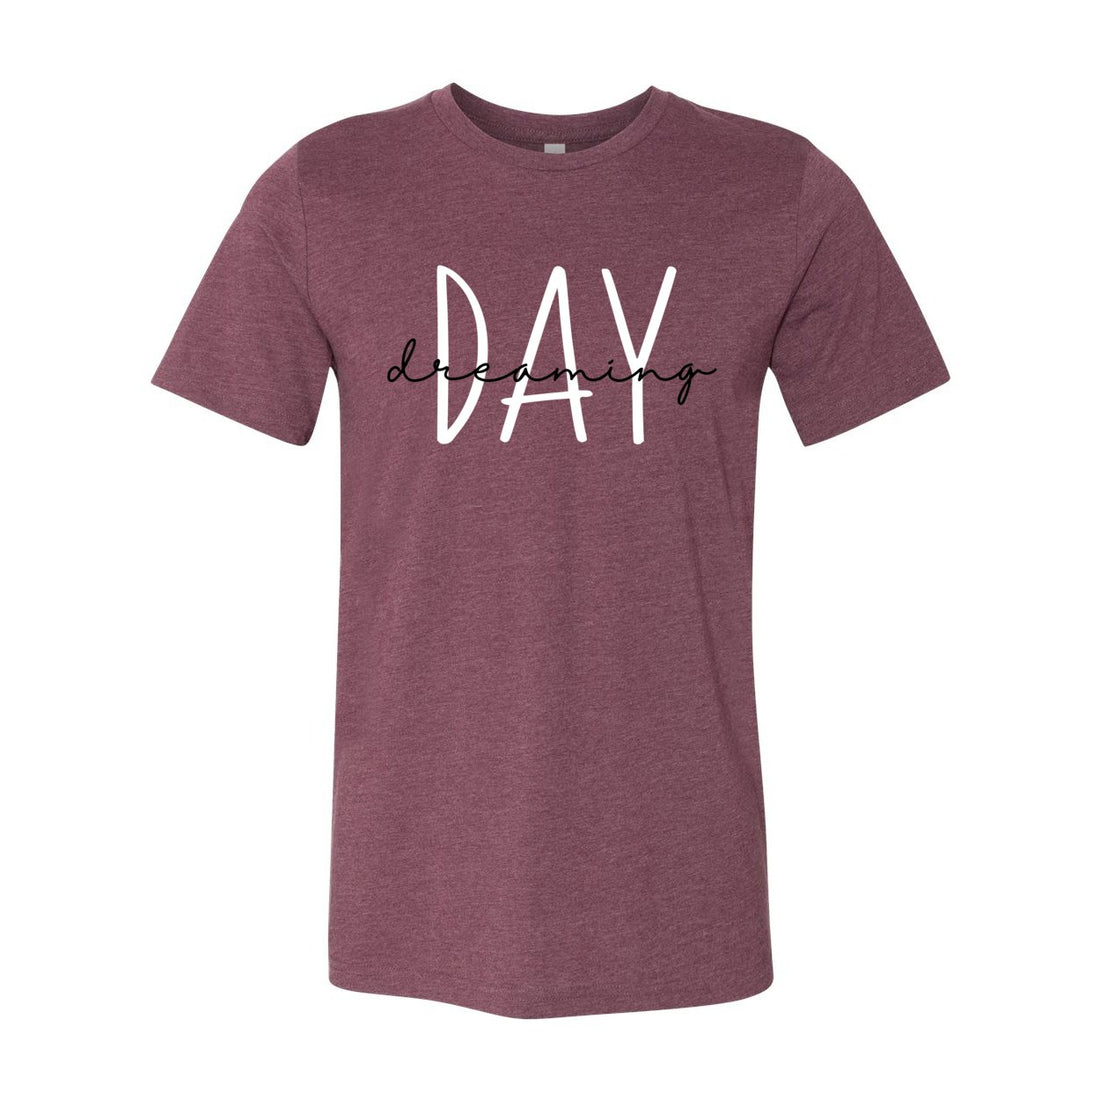 Day Dreaming Short Sleeve Jersey Tee - T-Shirts - Positively Sassy - Day Dreaming Short Sleeve Jersey Tee